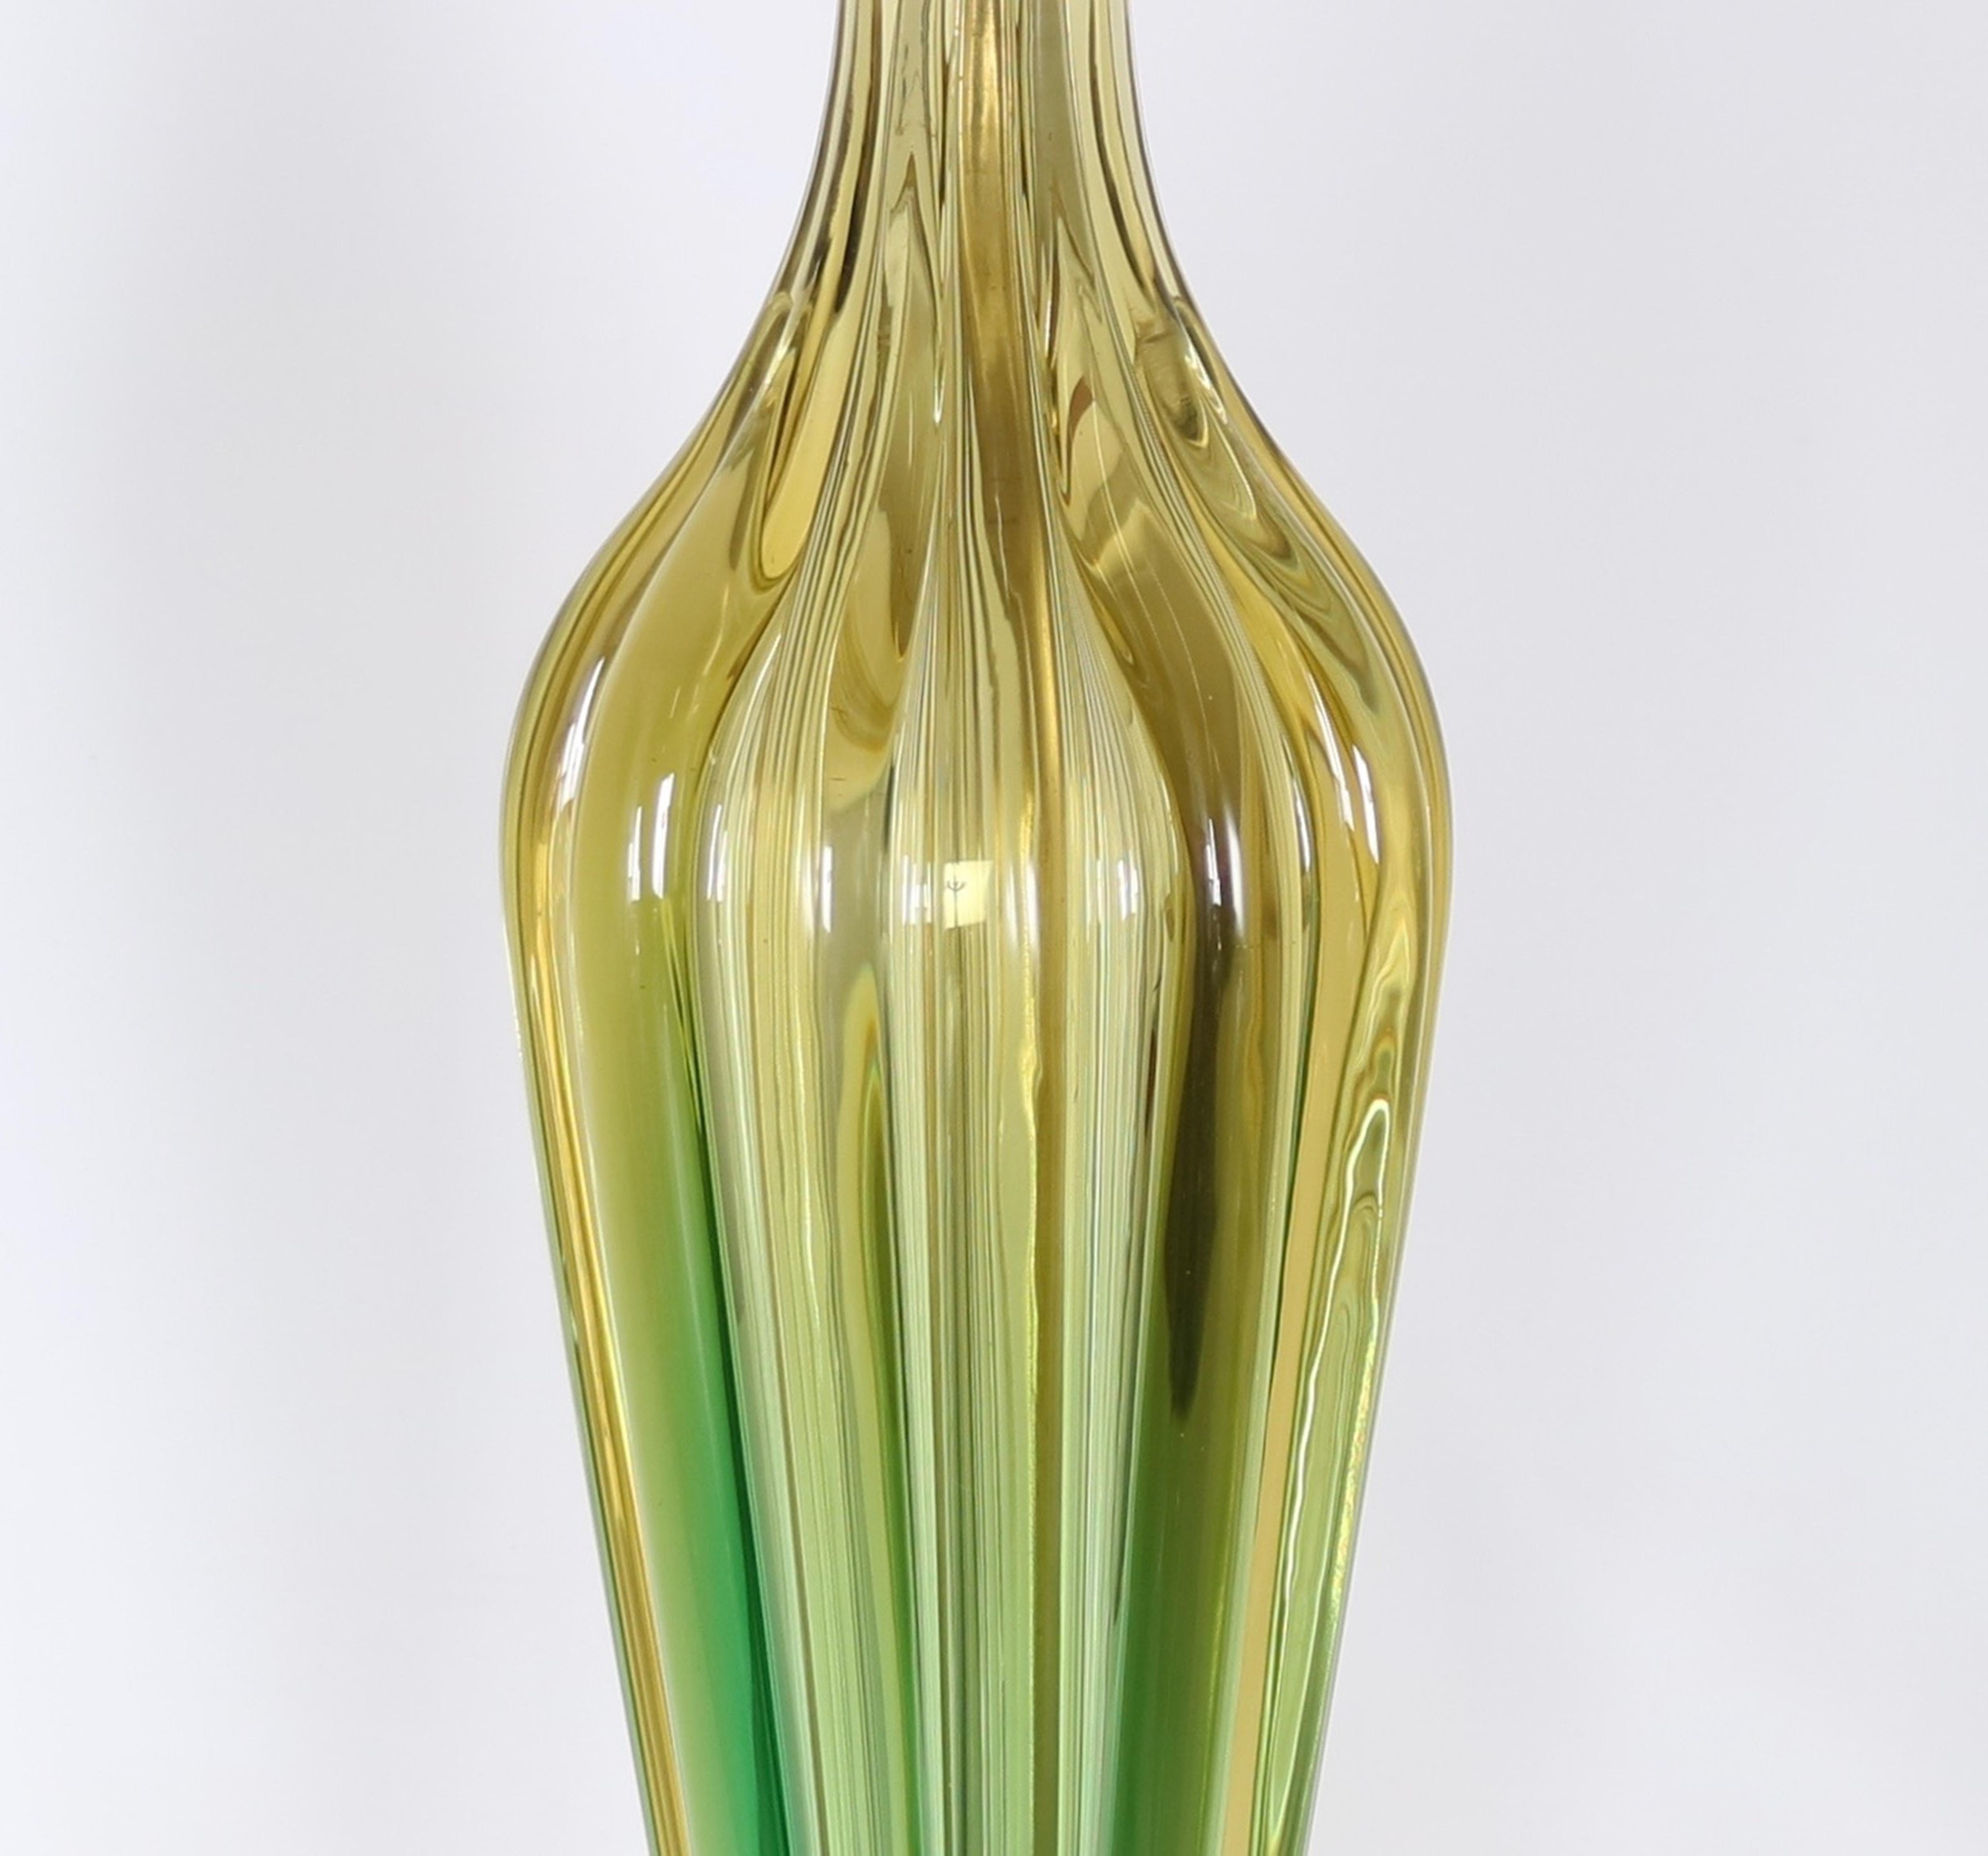 Seguso lamp crafted in murano glass in hues of green and gold. The piece features a ribbed amphora body in ombre gold to green. The lamp stands on a circular gilded wooden base. Fully restored with all new wiring and hardware including a double